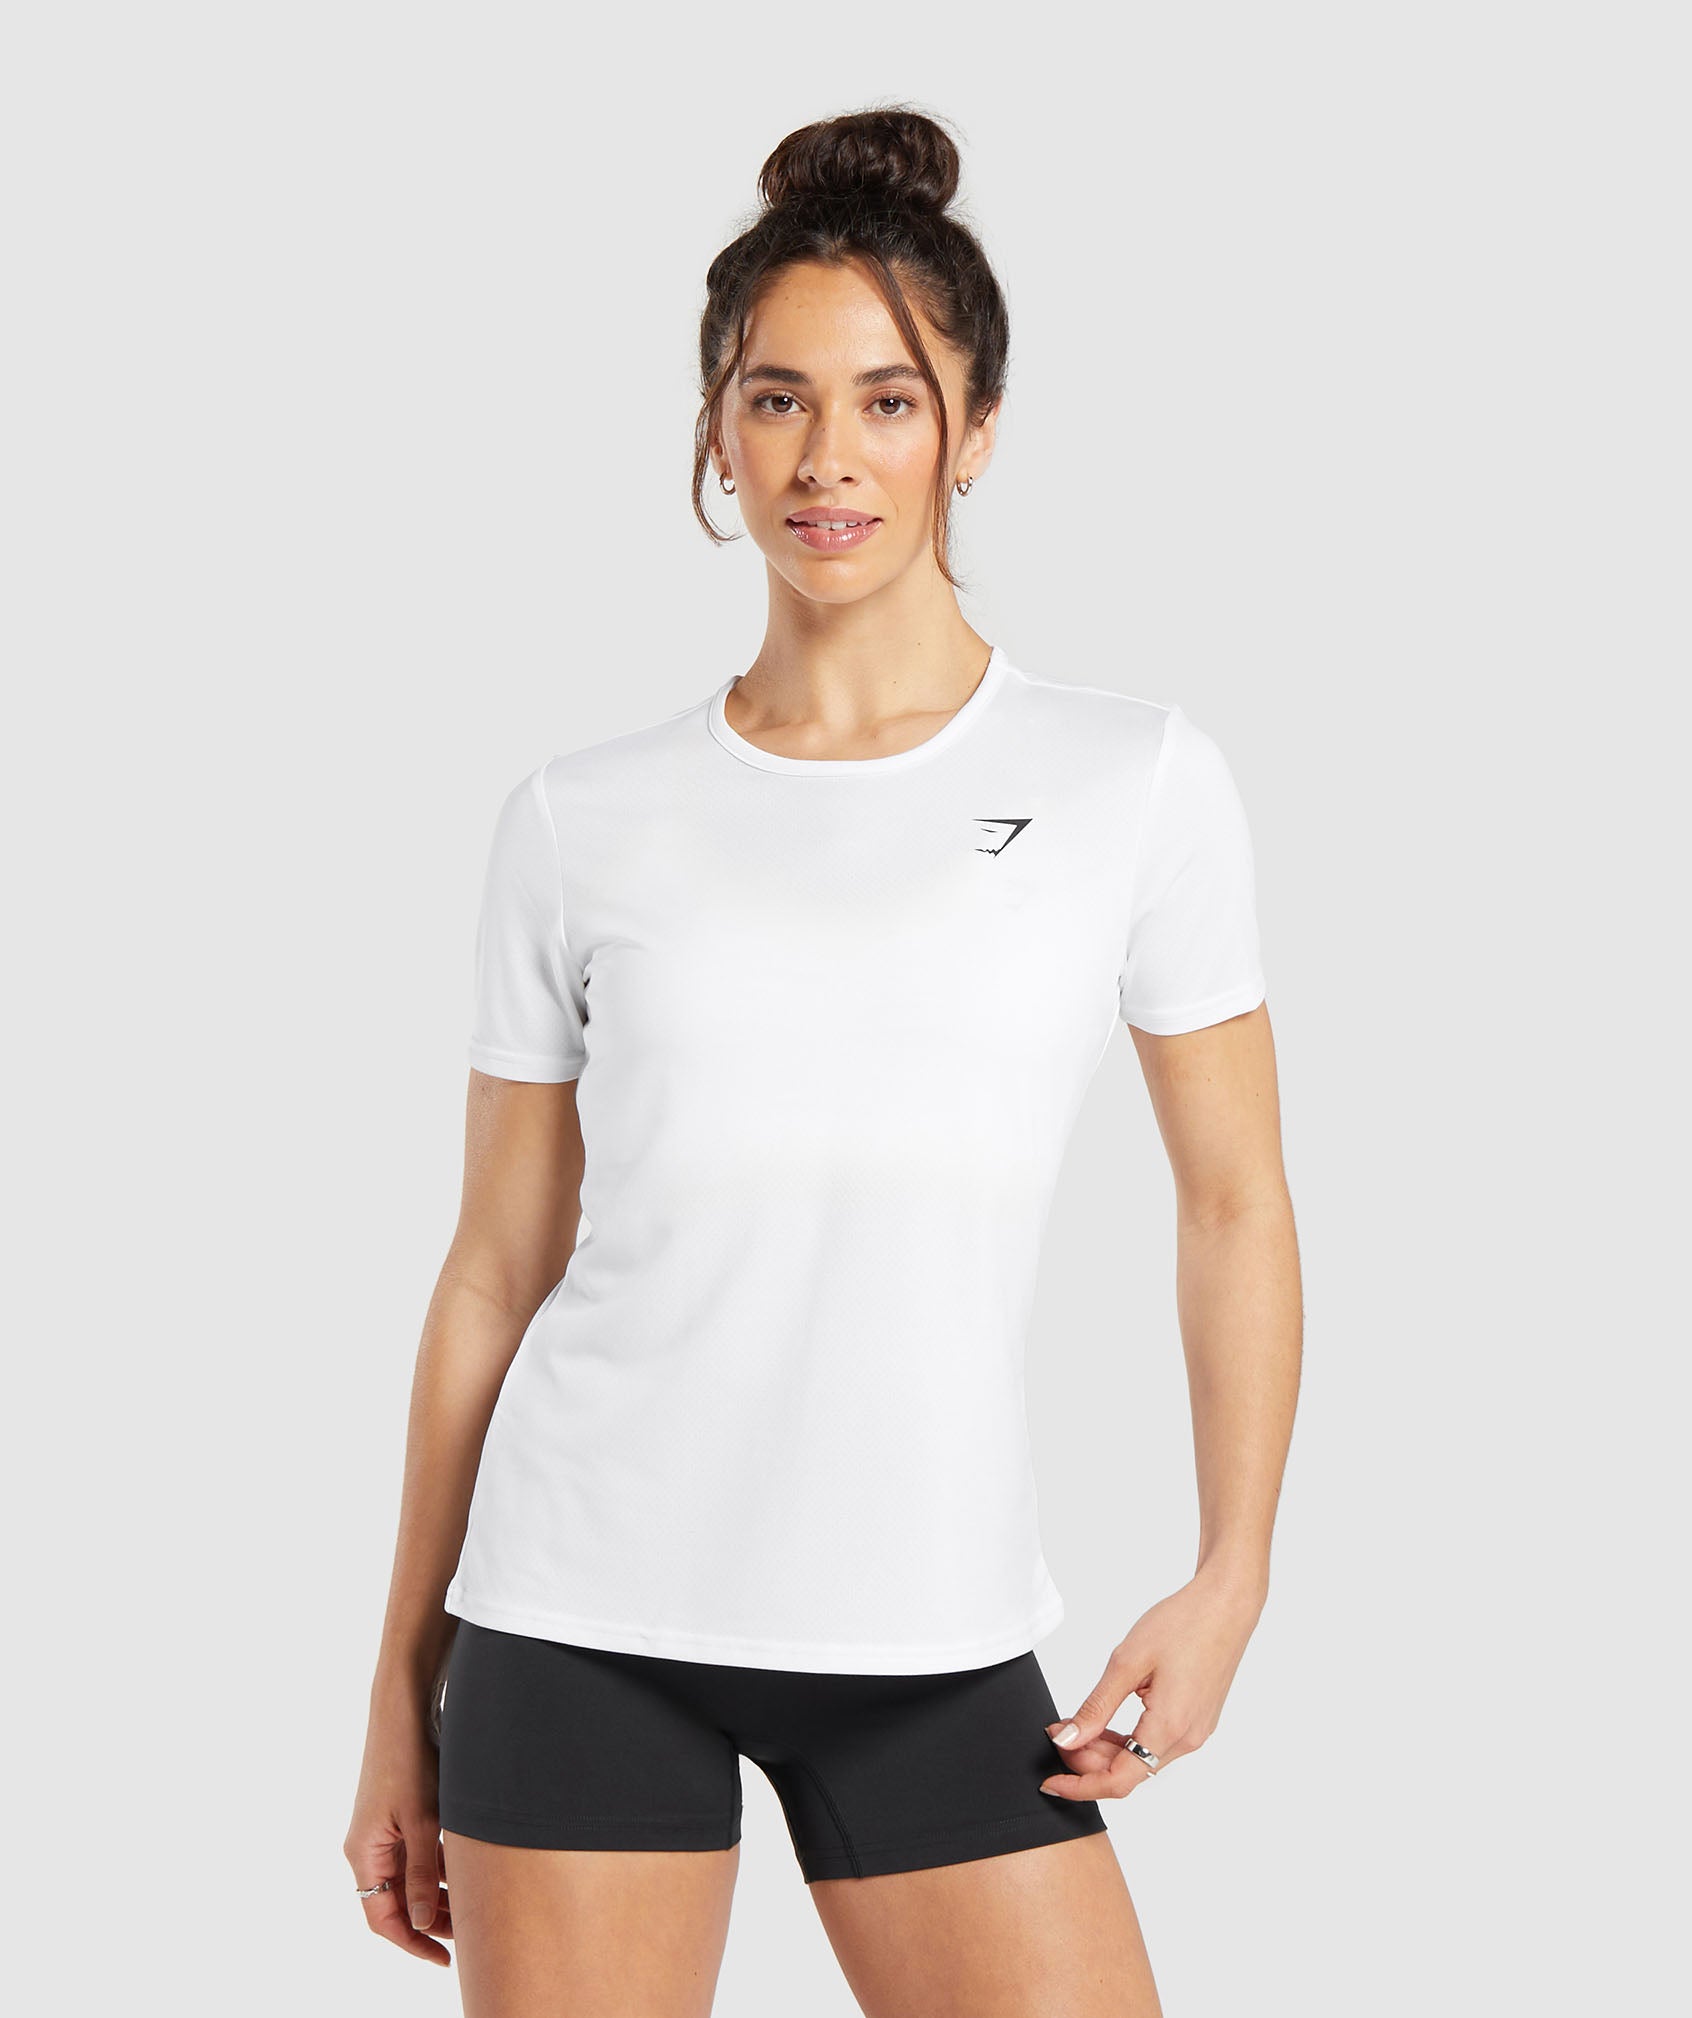 Training T-Shirt in White is out of stock